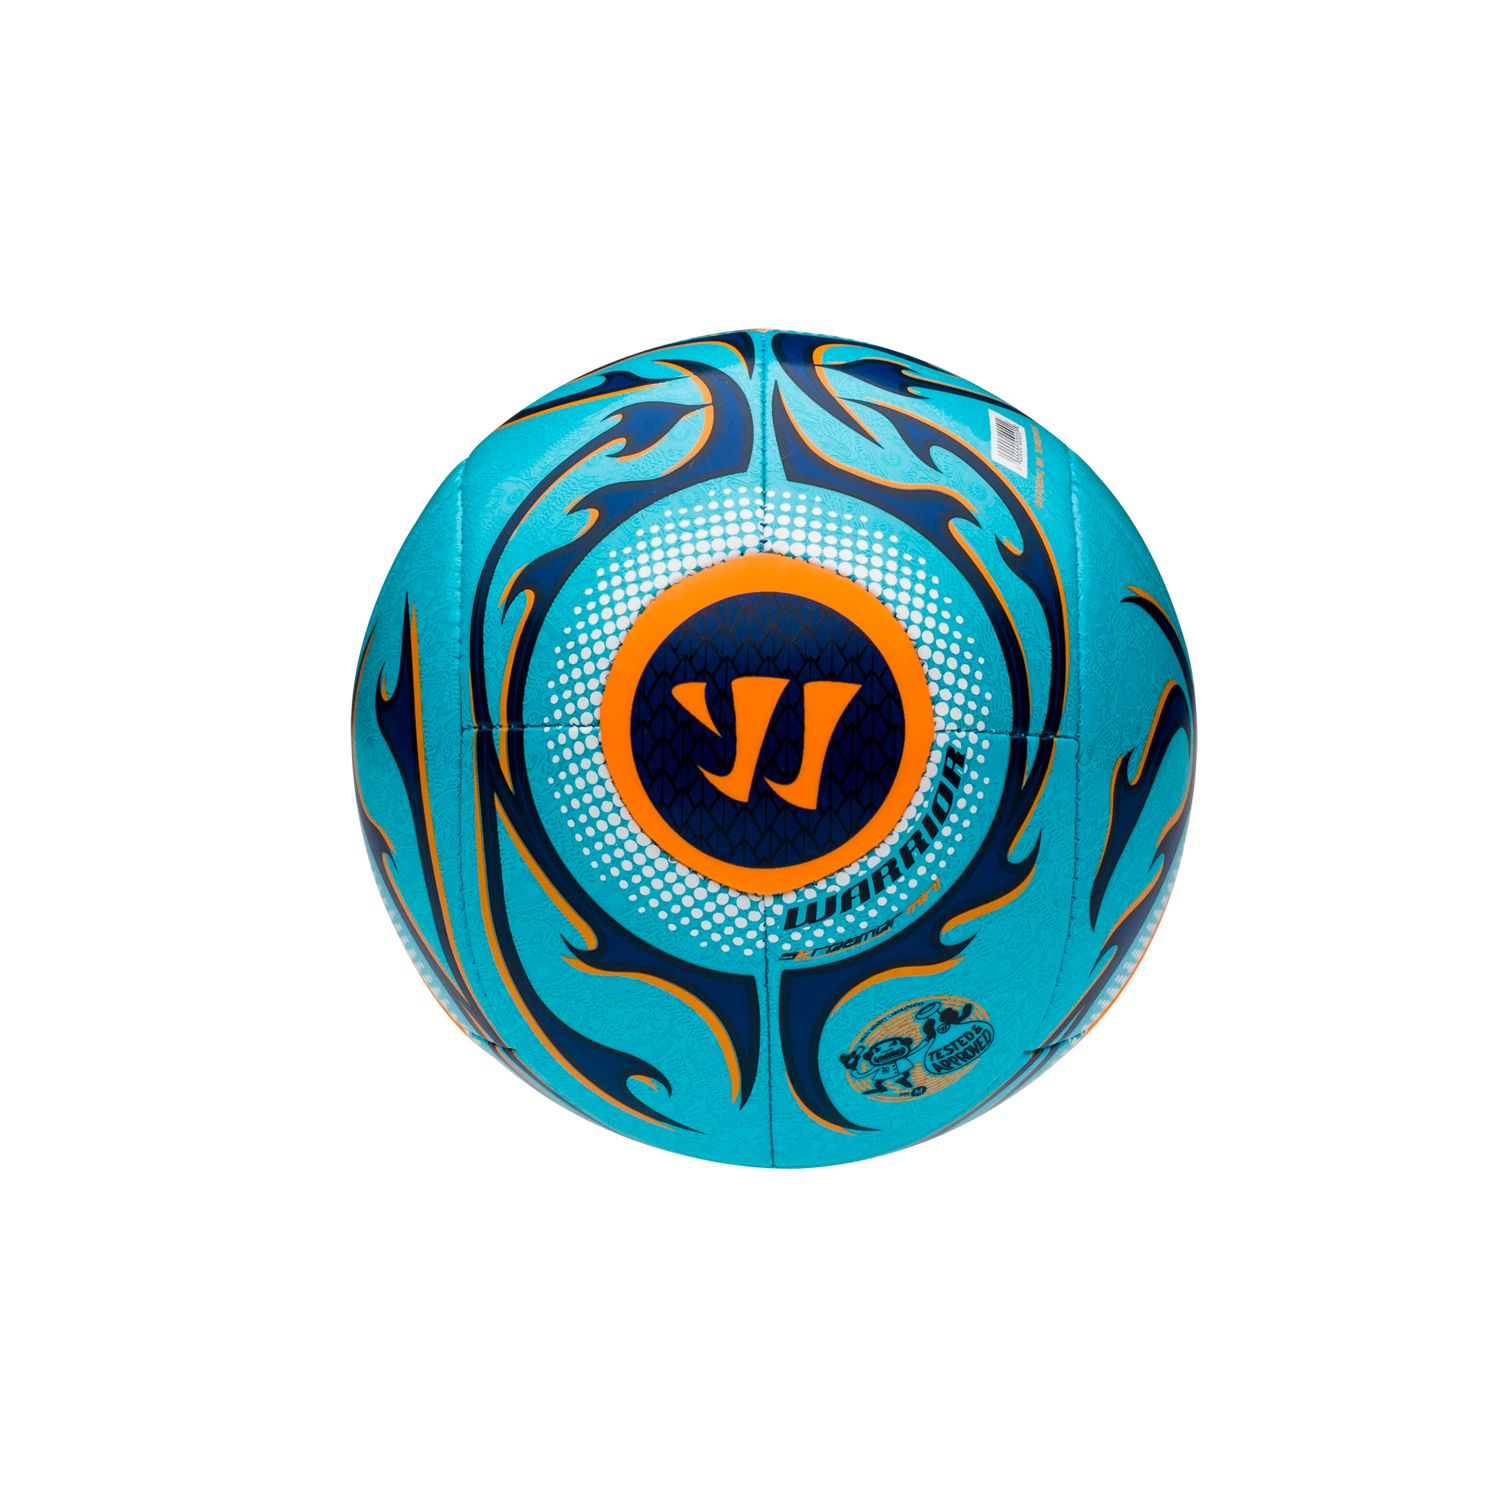 Skreamer Mini Ball, White with Blue Radiance & Insignia Blue image number 0